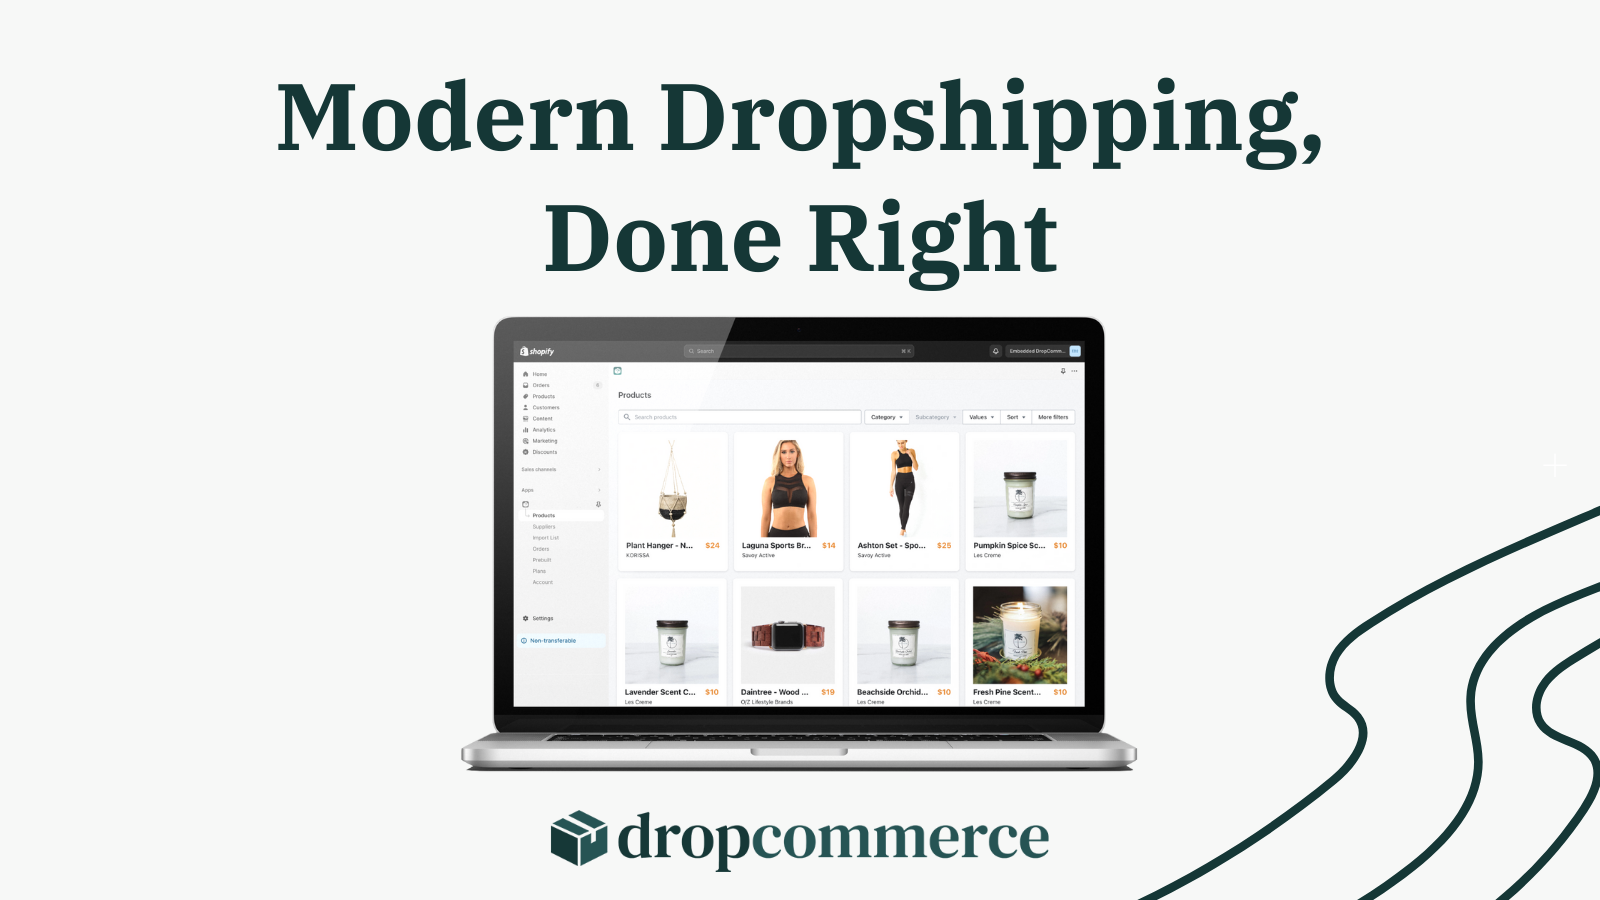 Dropshipping Has Changed